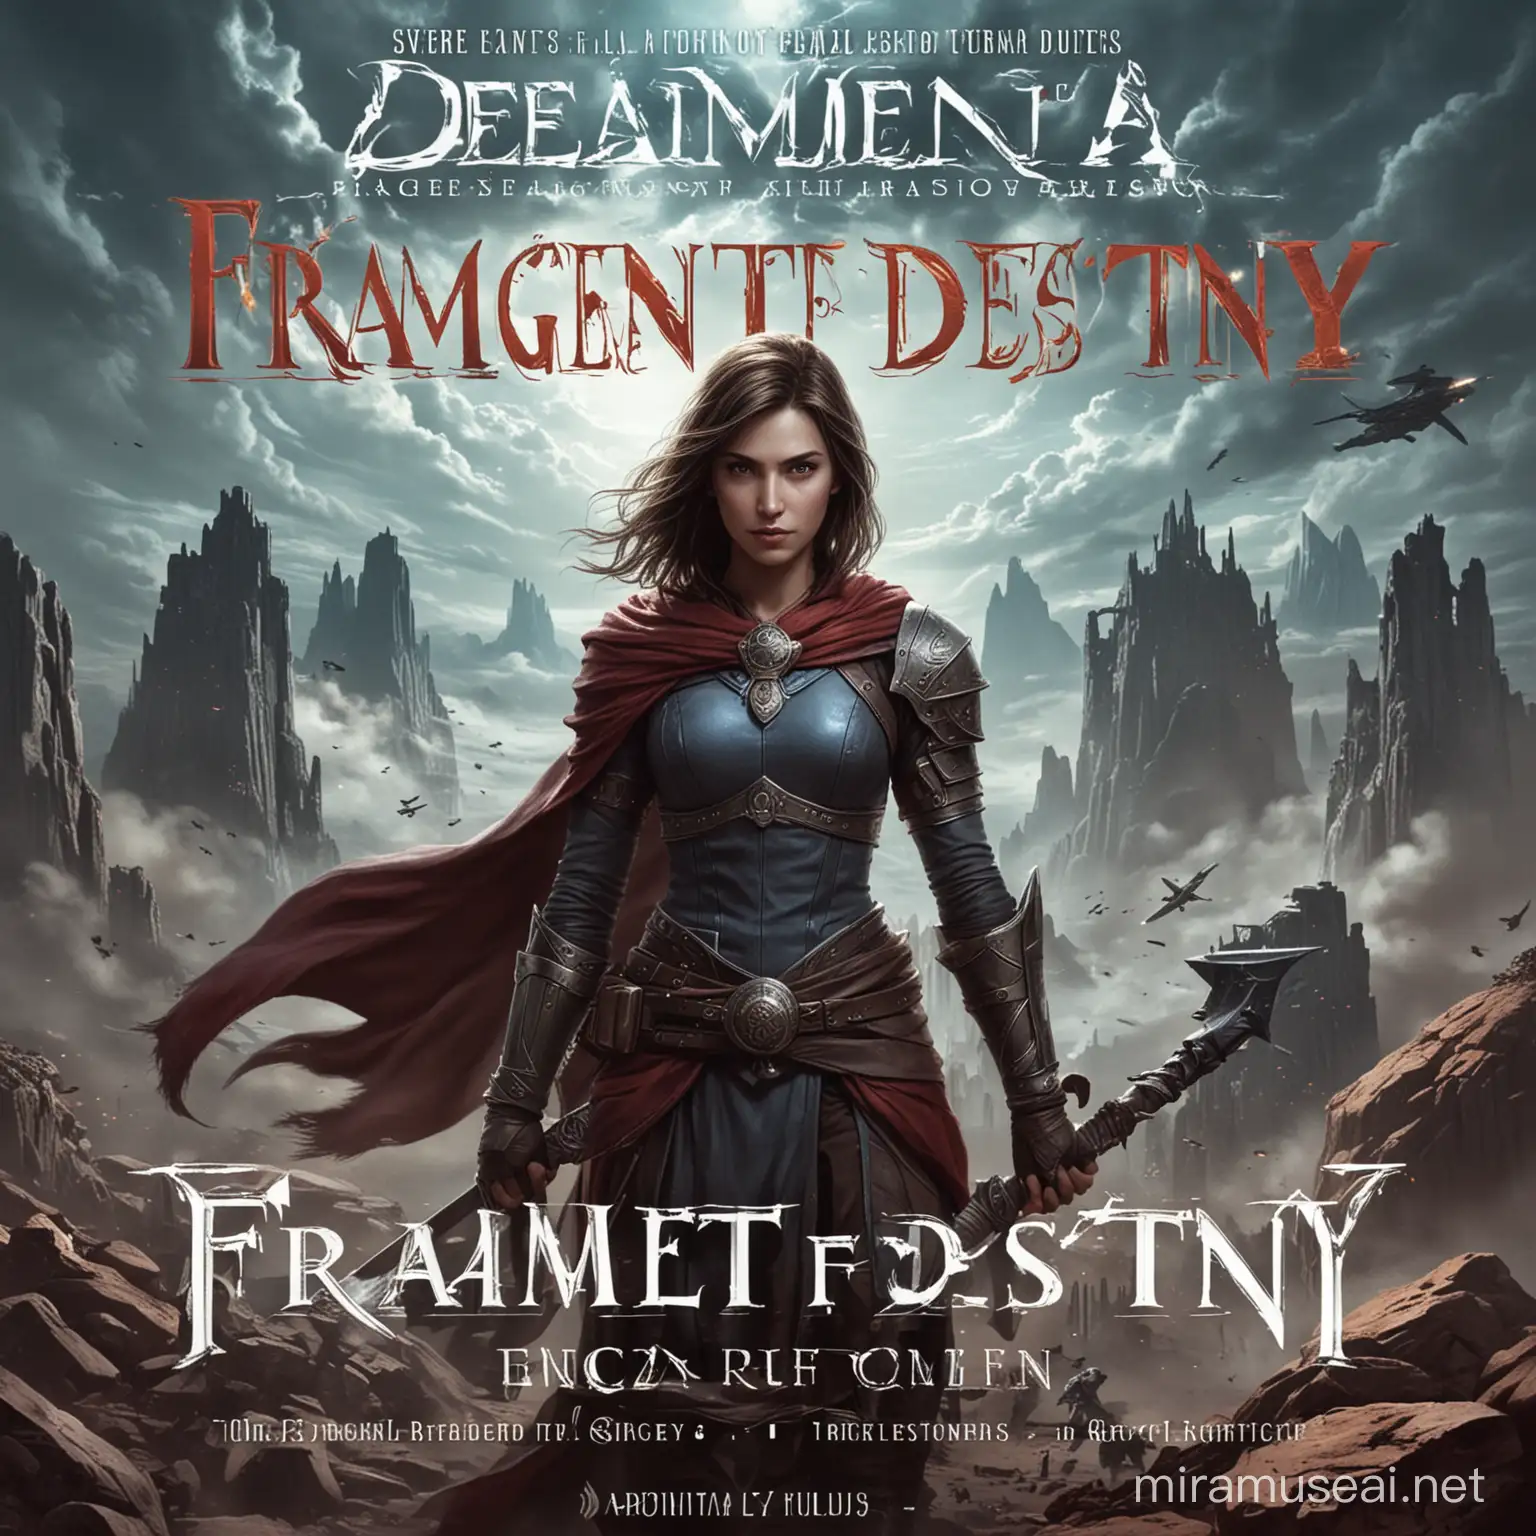 image for book cover named ( fragment of destiny )